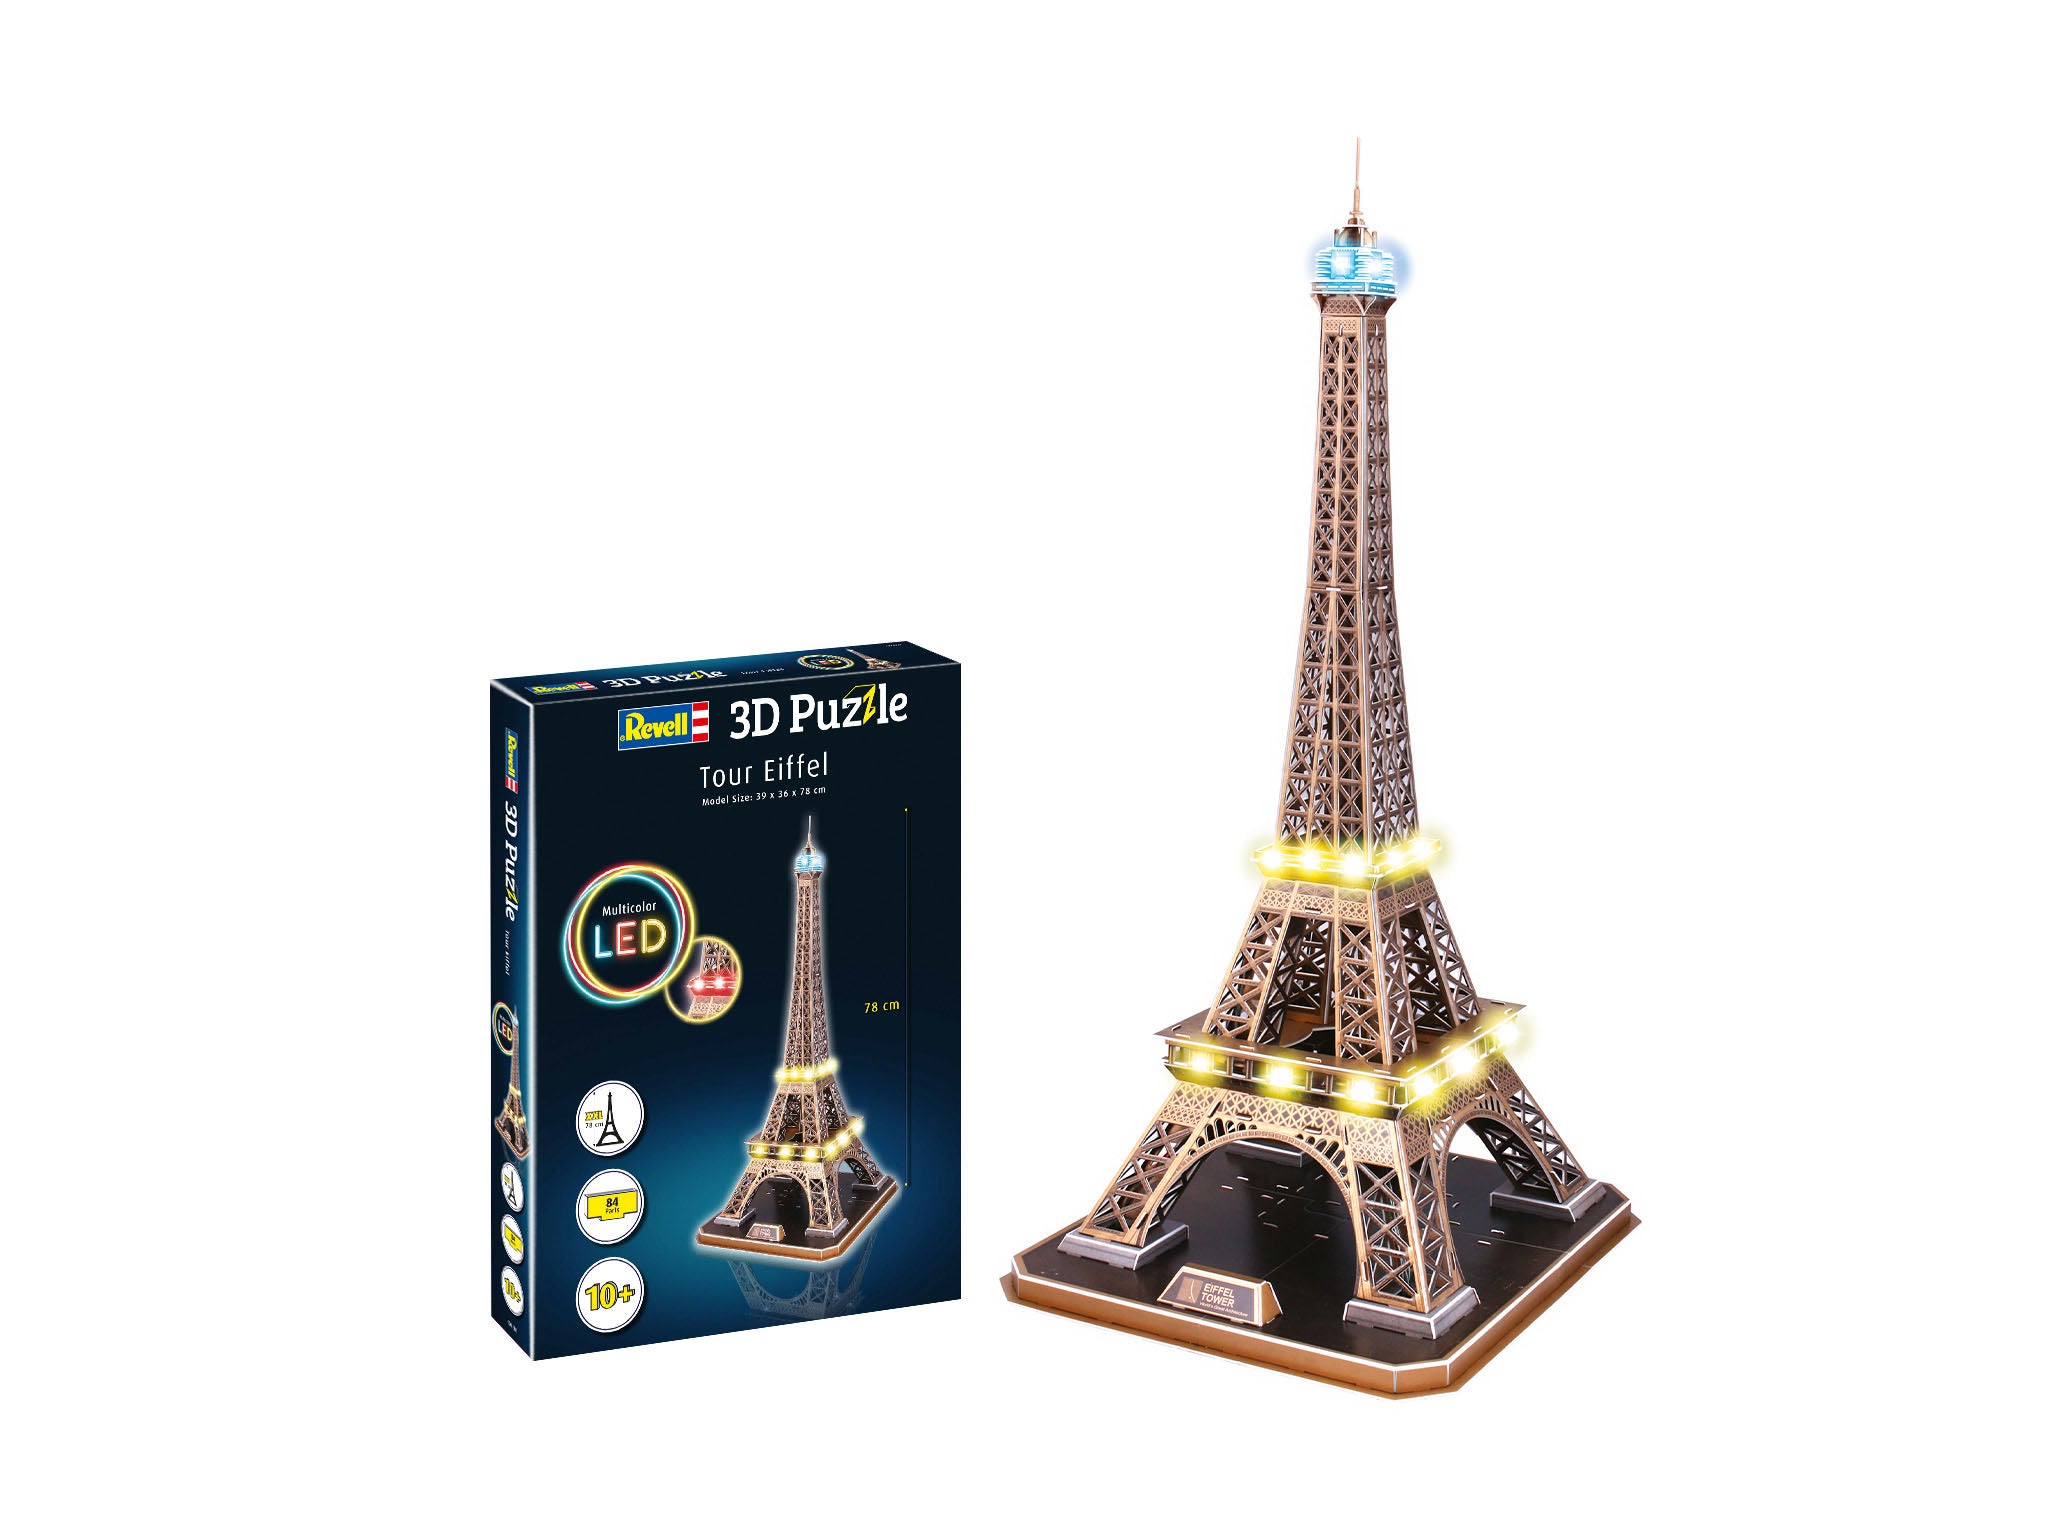 3D Puzzle Revell Eiffel Tower - LED Edition